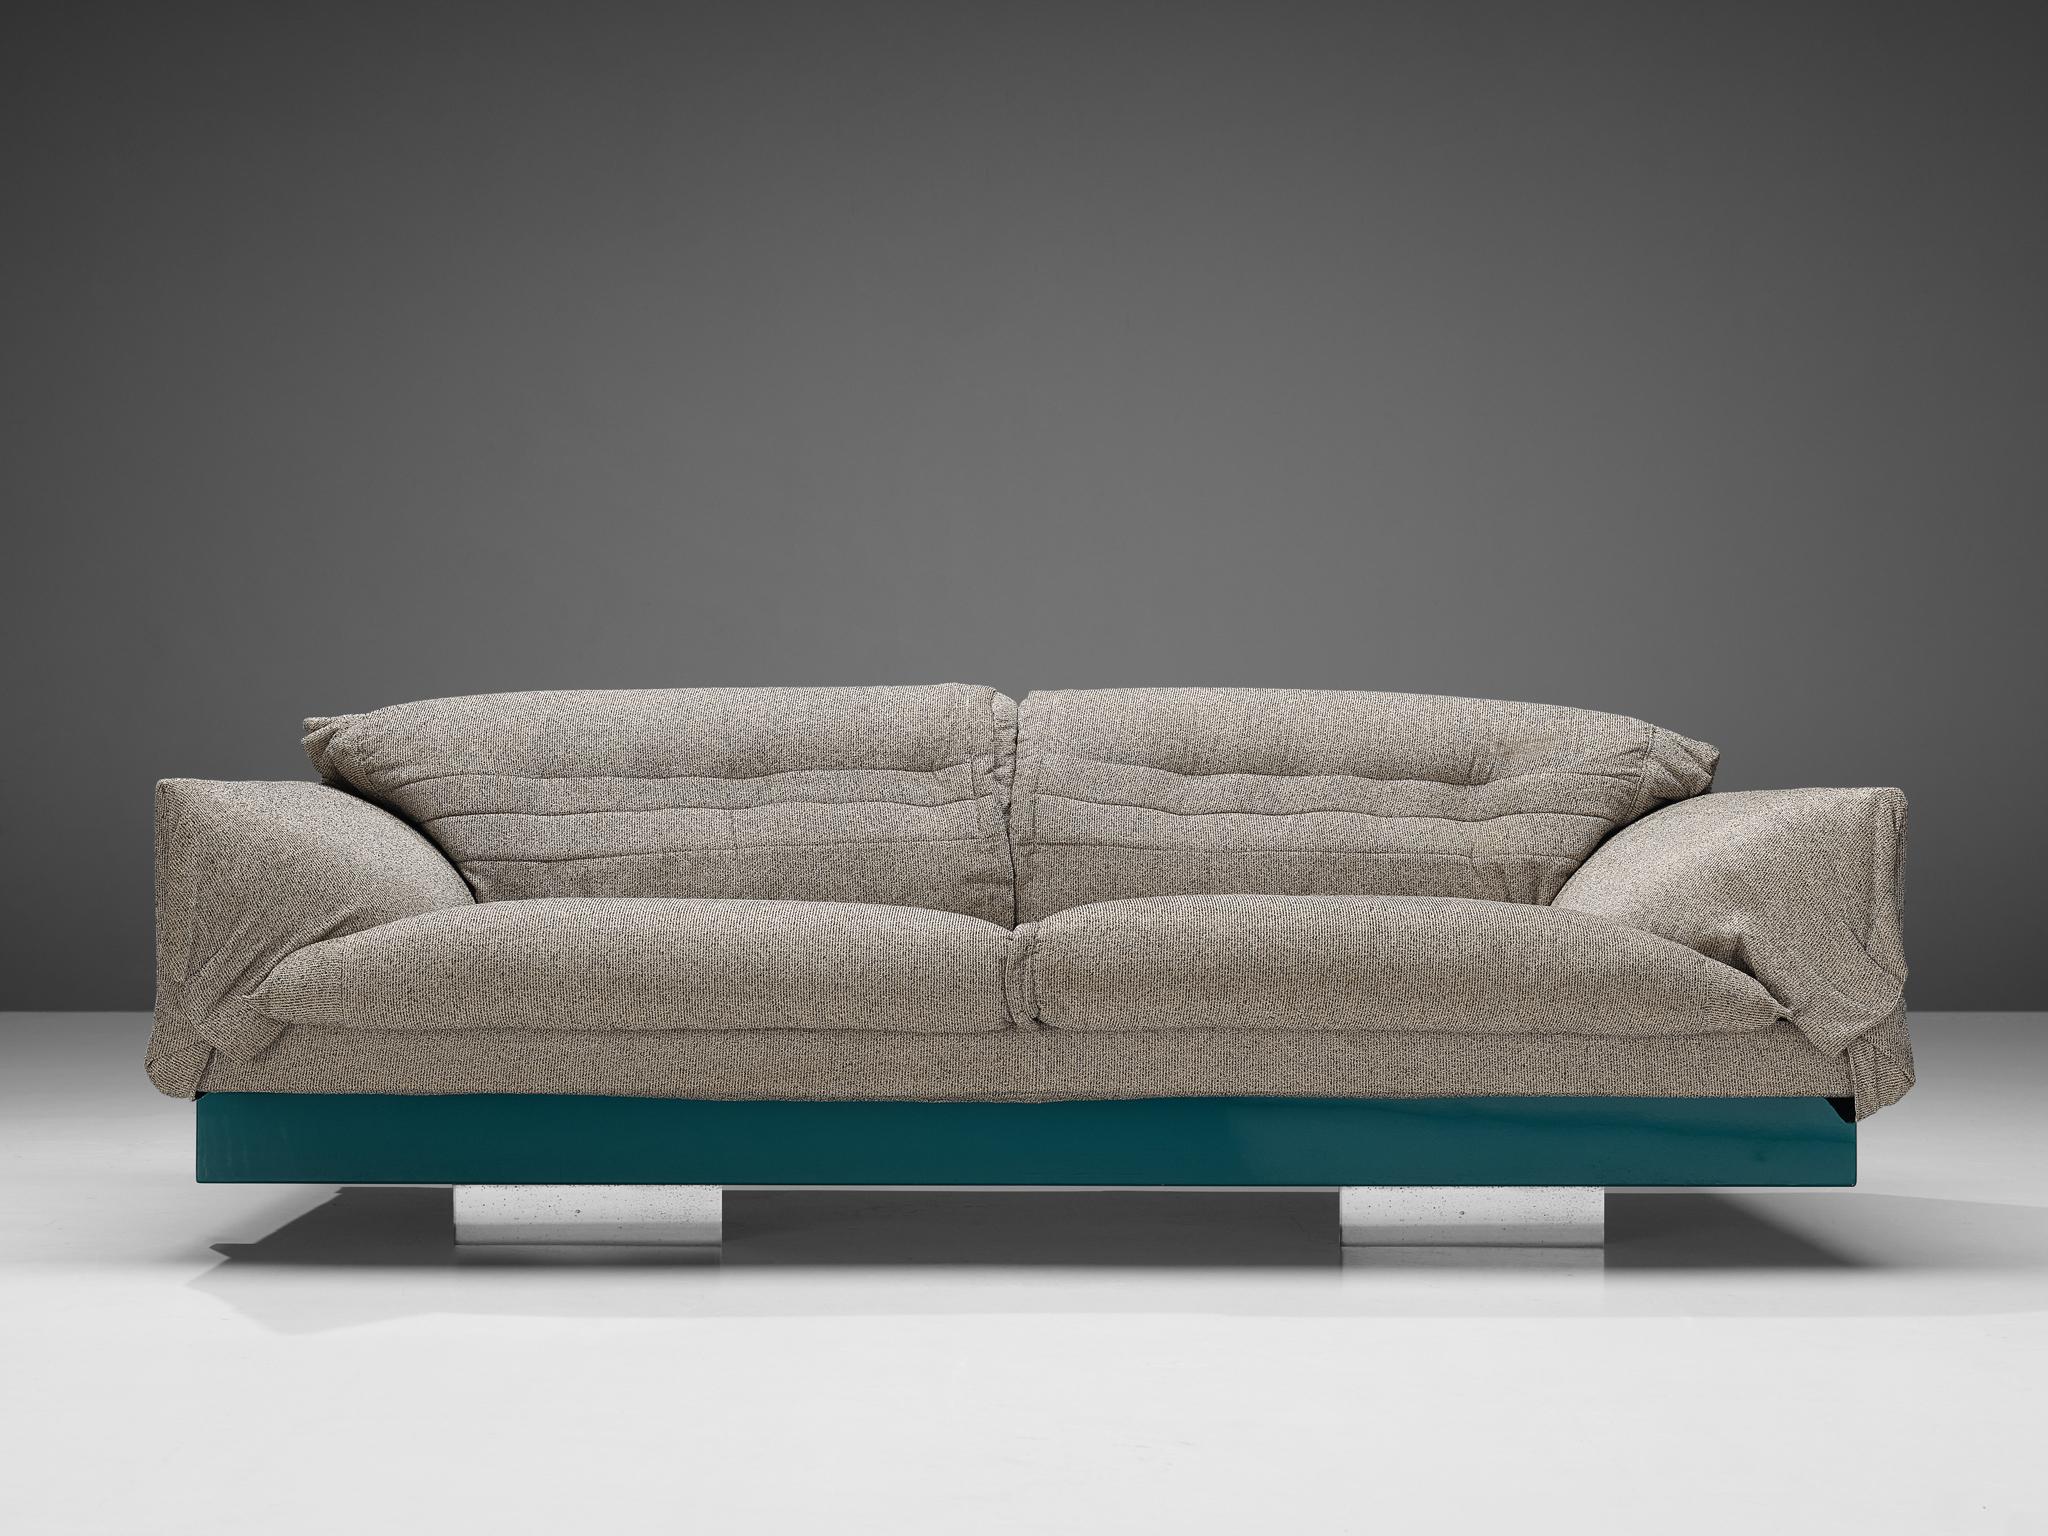 Mauro Lipparini for Saporiti, 'Ellypse' sofa, fabric, lacquered wood, chrome, Italy, 1970s

Mauro Lipparini, an Italian designer, has created the 'Ellypse' sofa for Saporiti, which stands out for its unique structure that blends hefty and